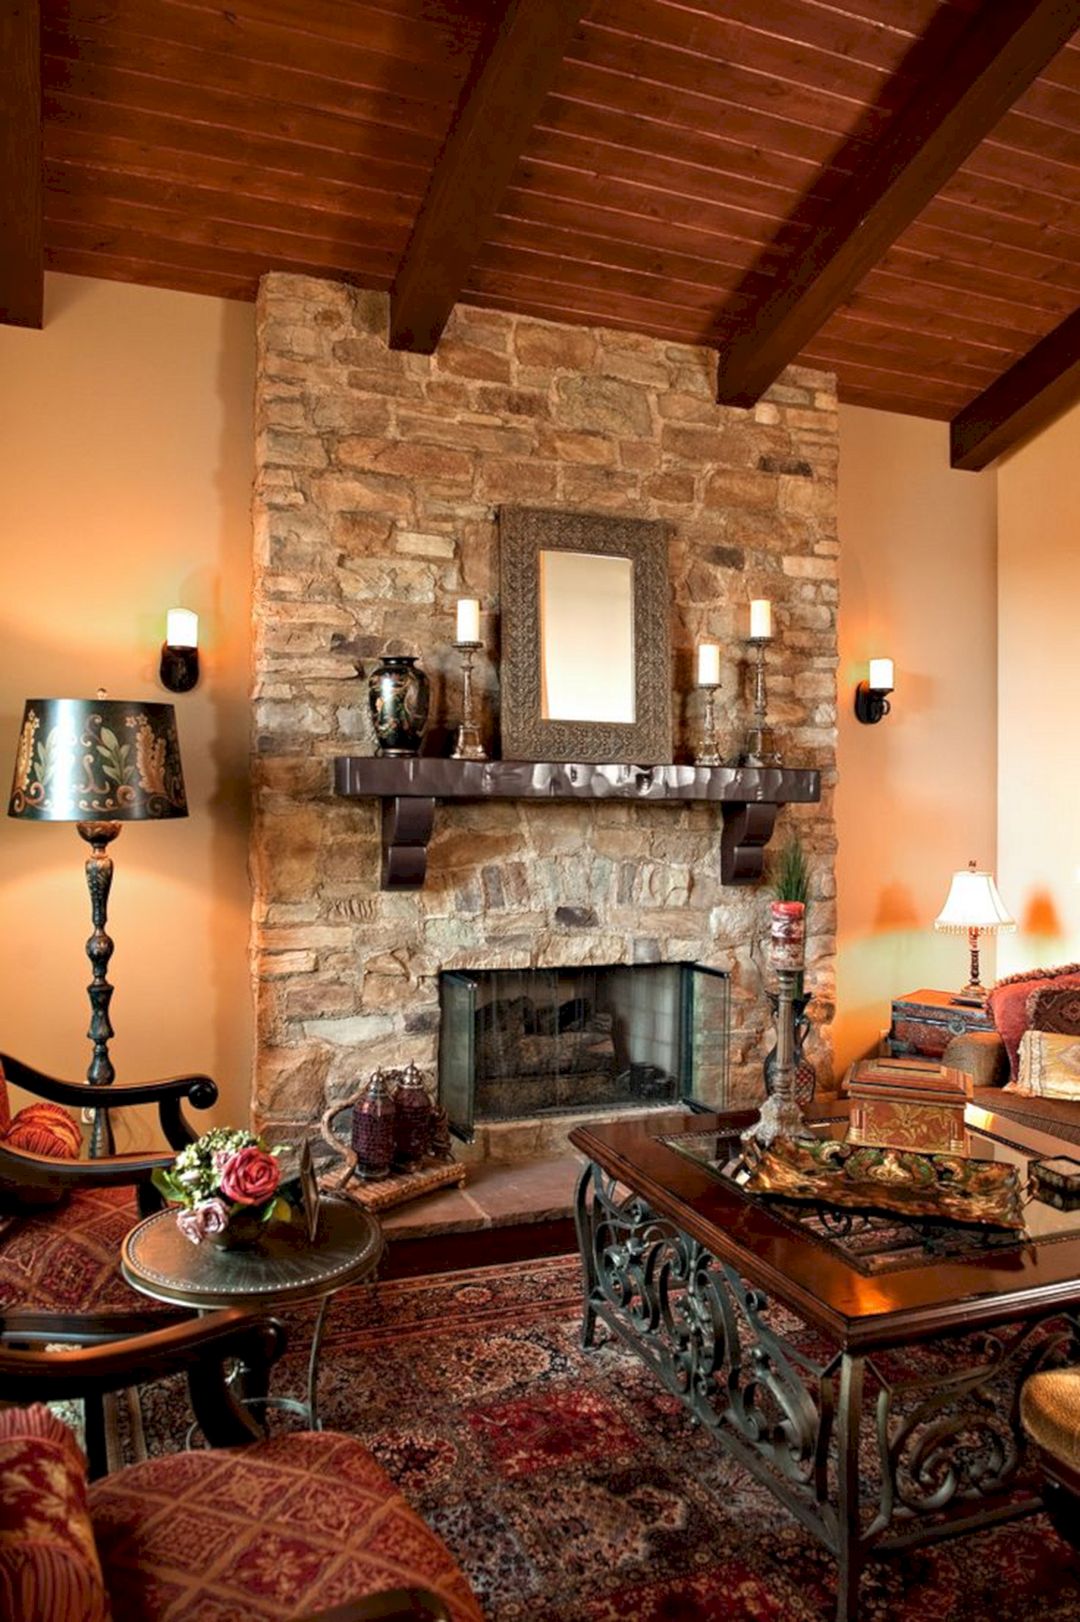 Rustic Living Room With Stone Fireplace (Rustic Living Room With Stone Fireplace) design ideas